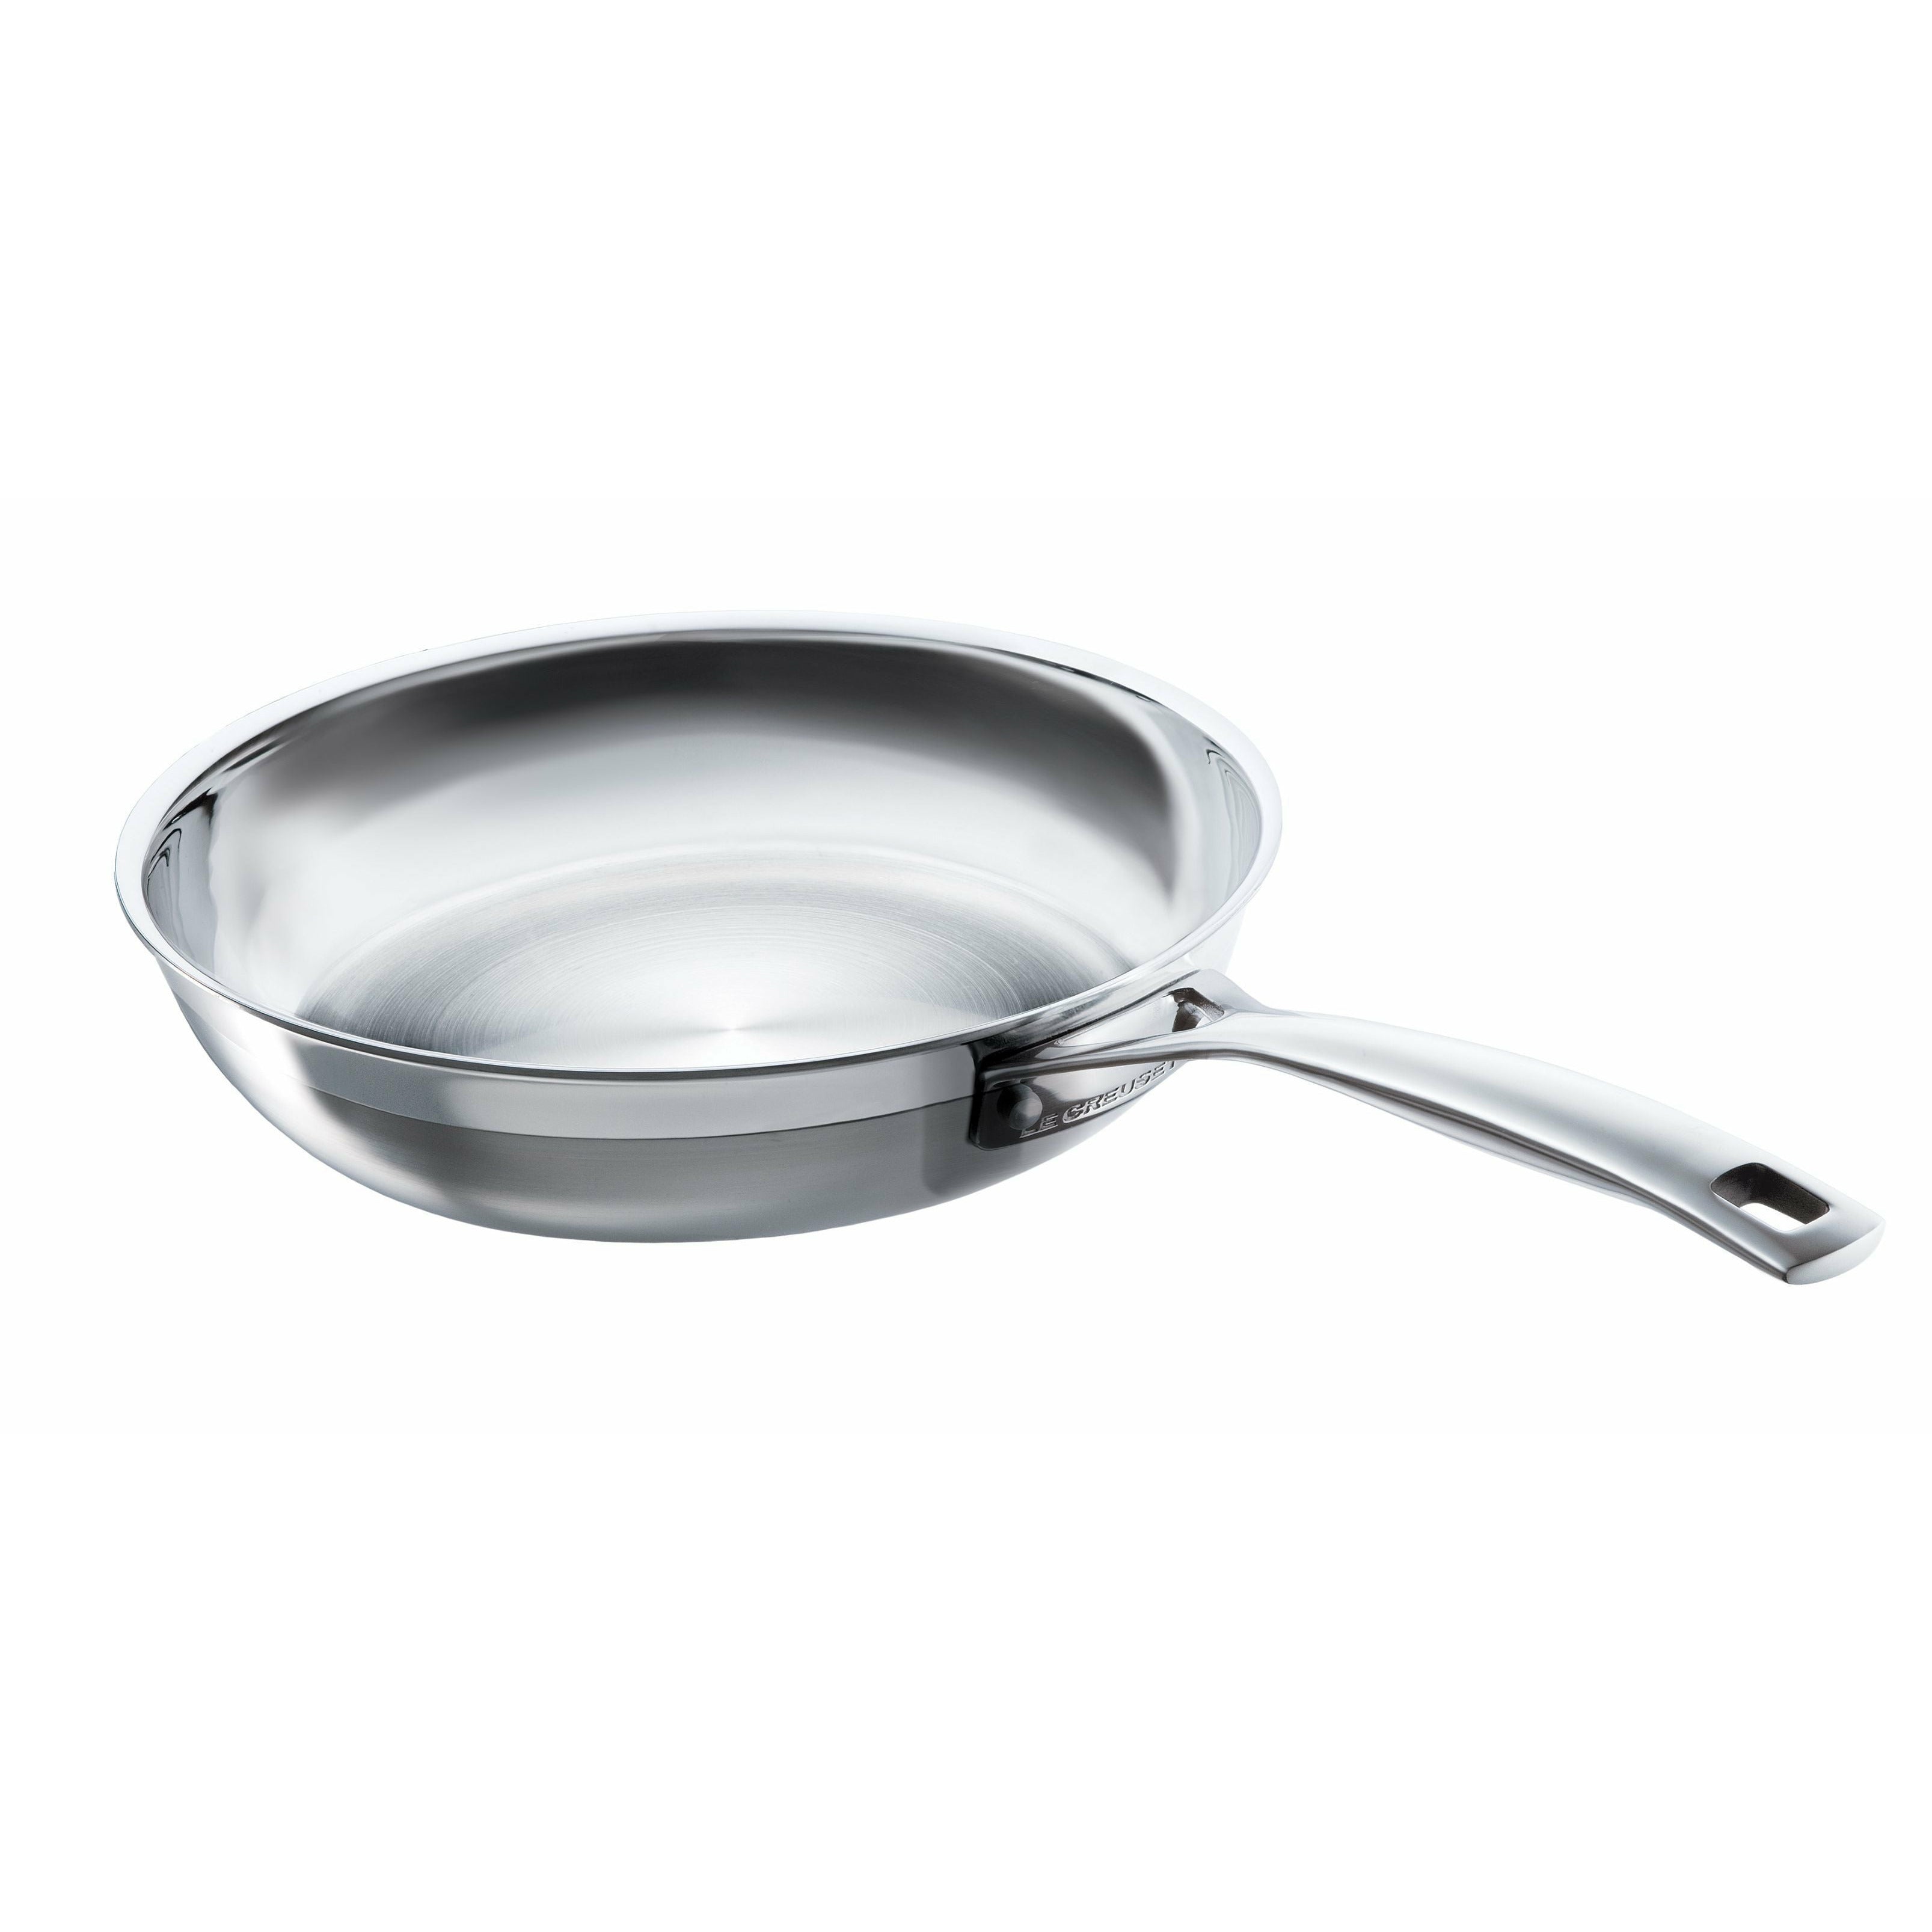 Le Creuset 3 Ply Stainless Steel Uncoated Frying Pan, 24 Cm